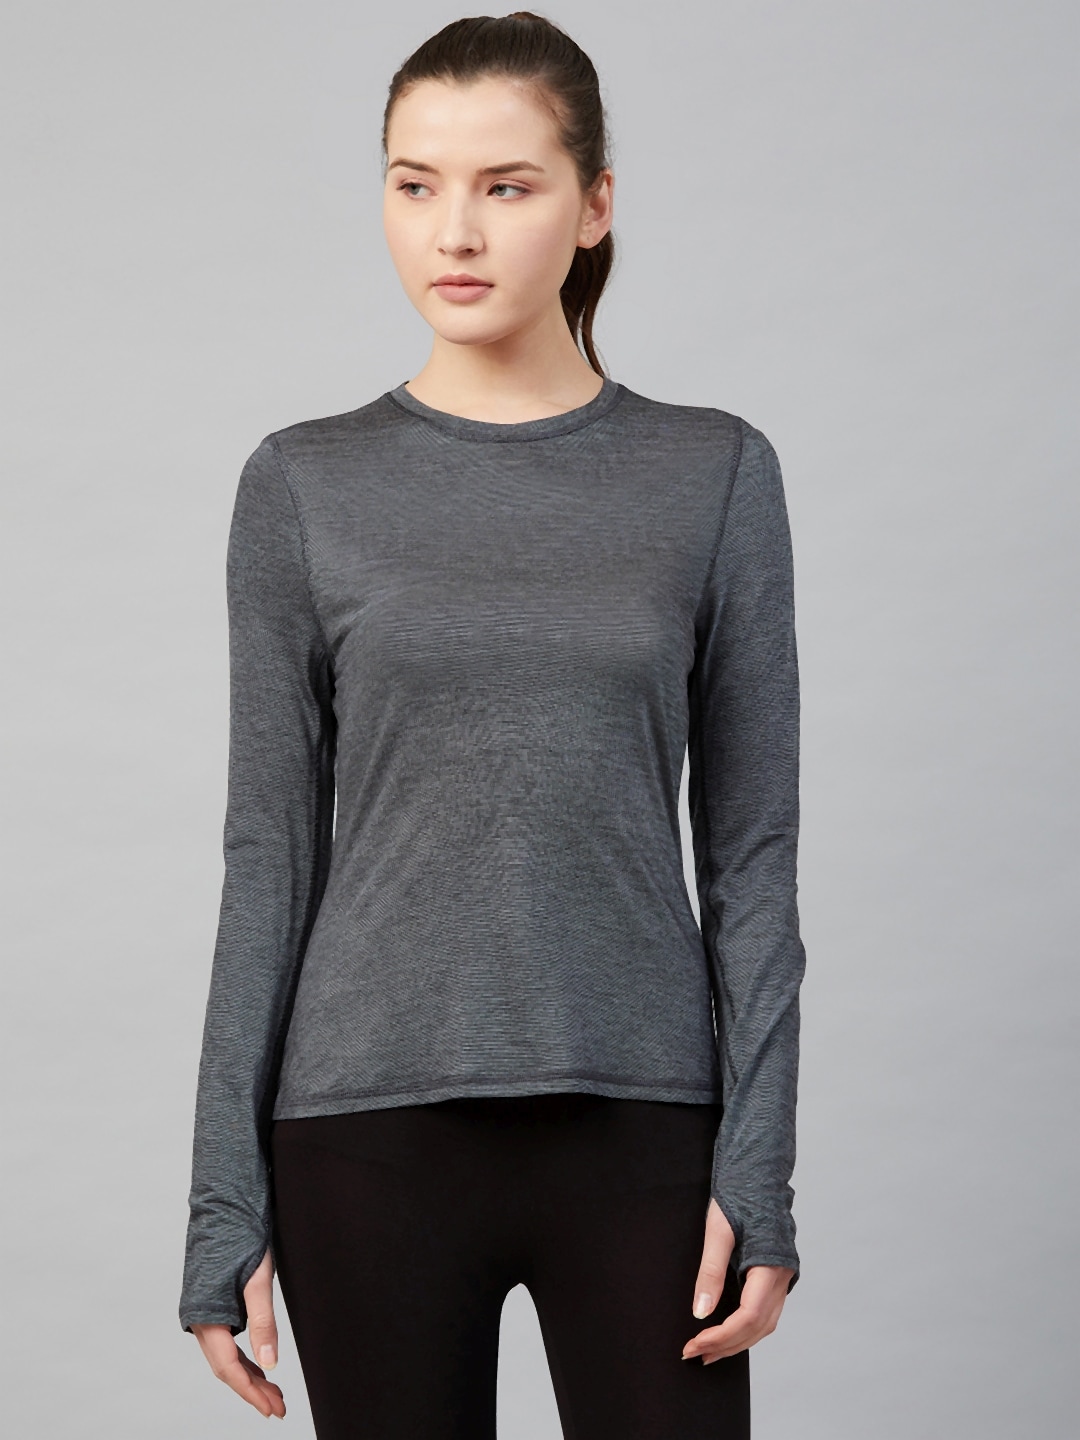 Marks & Spencer Women Charcoal Grey Solid Round Neck T-shirt Price in India